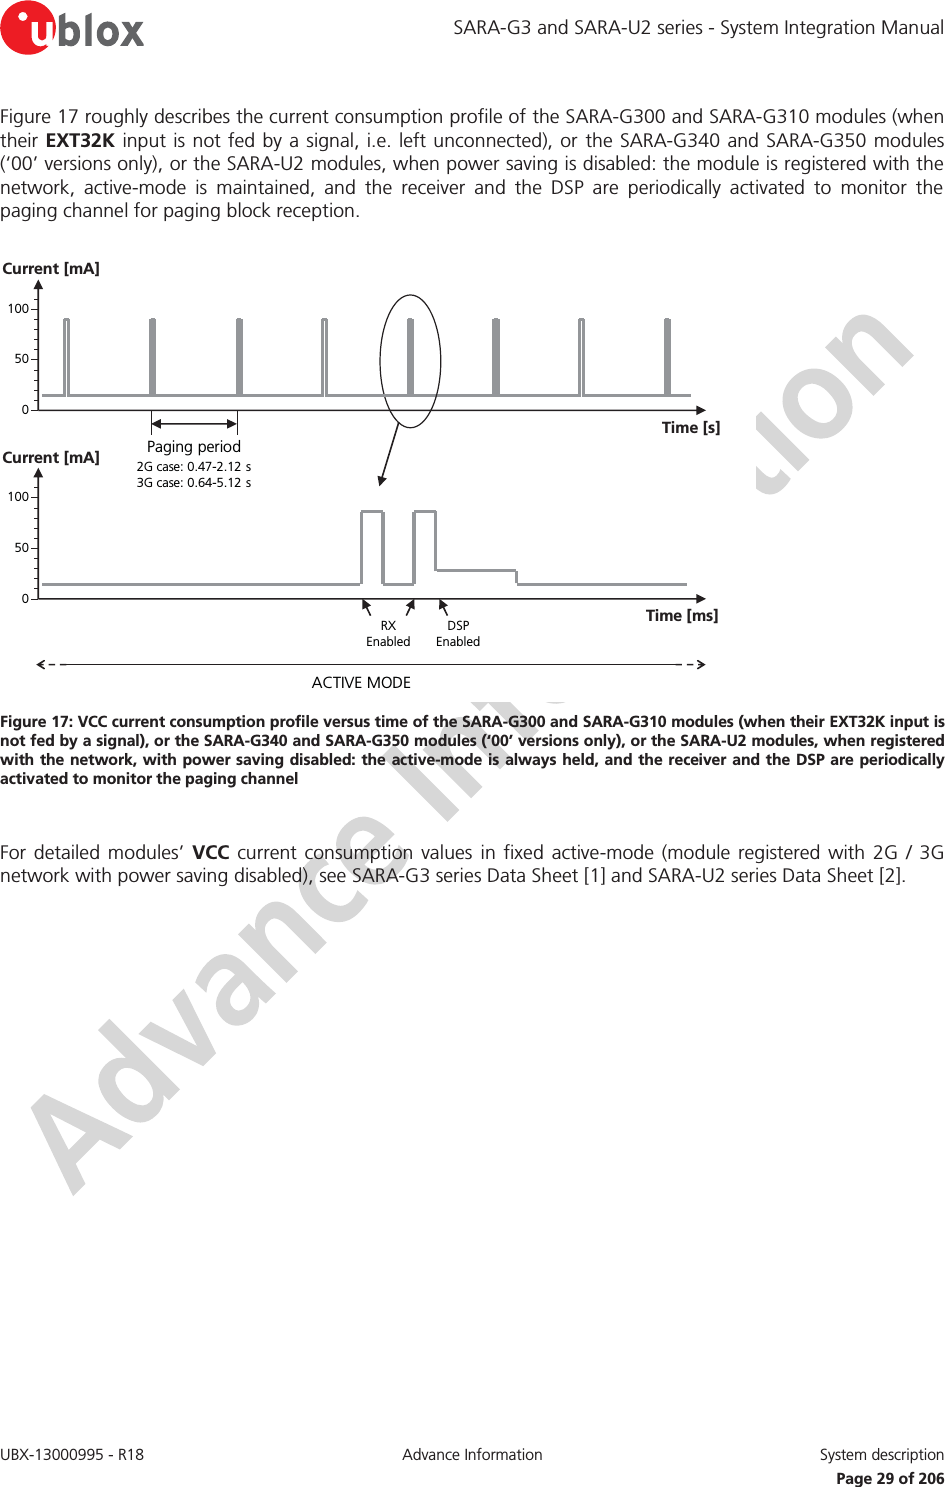 SARA-G3 and SARA-U2 series - System Integration Manual UBX-13000995 - R18  Advance Information System description   Page 29 of 206 Figure 17 roughly describes the current consumption profile of the SARA-G300 and SARA-G310 modules (when their EXT32K input is not fed by a signal, i.e. left unconnected), or the SARA-G340 and SARA-G350 modules (‘00’ versions only), or the SARA-U2 modules, when power saving is disabled: the module is registered with the network, active-mode is maintained, and the receiver and the DSP are periodically activated to monitor the paging channel for paging block reception.  ACTIVE MODE2G case: 0.47-2.12 s    3G case: 0.64-5.12 sPaging periodTime [s]Current [mA]100500Time [ms]Current [mA]100500RX EnabledDSP Enabled Figure 17: VCC current consumption profile versus time of the SARA-G300 and SARA-G310 modules (when their EXT32K input is not fed by a signal), or the SARA-G340 and SARA-G350 modules (‘00’ versions only), or the SARA-U2 modules, when registered with the network, with power saving disabled: the active-mode is always held, and the receiver and the DSP are periodically activated to monitor the paging channel  For detailed modules’ VCC current consumption values in fixed active-mode (module registered with 2G / 3G network with power saving disabled), see SARA-G3 series Data Sheet [1] and SARA-U2 series Data Sheet [2].  